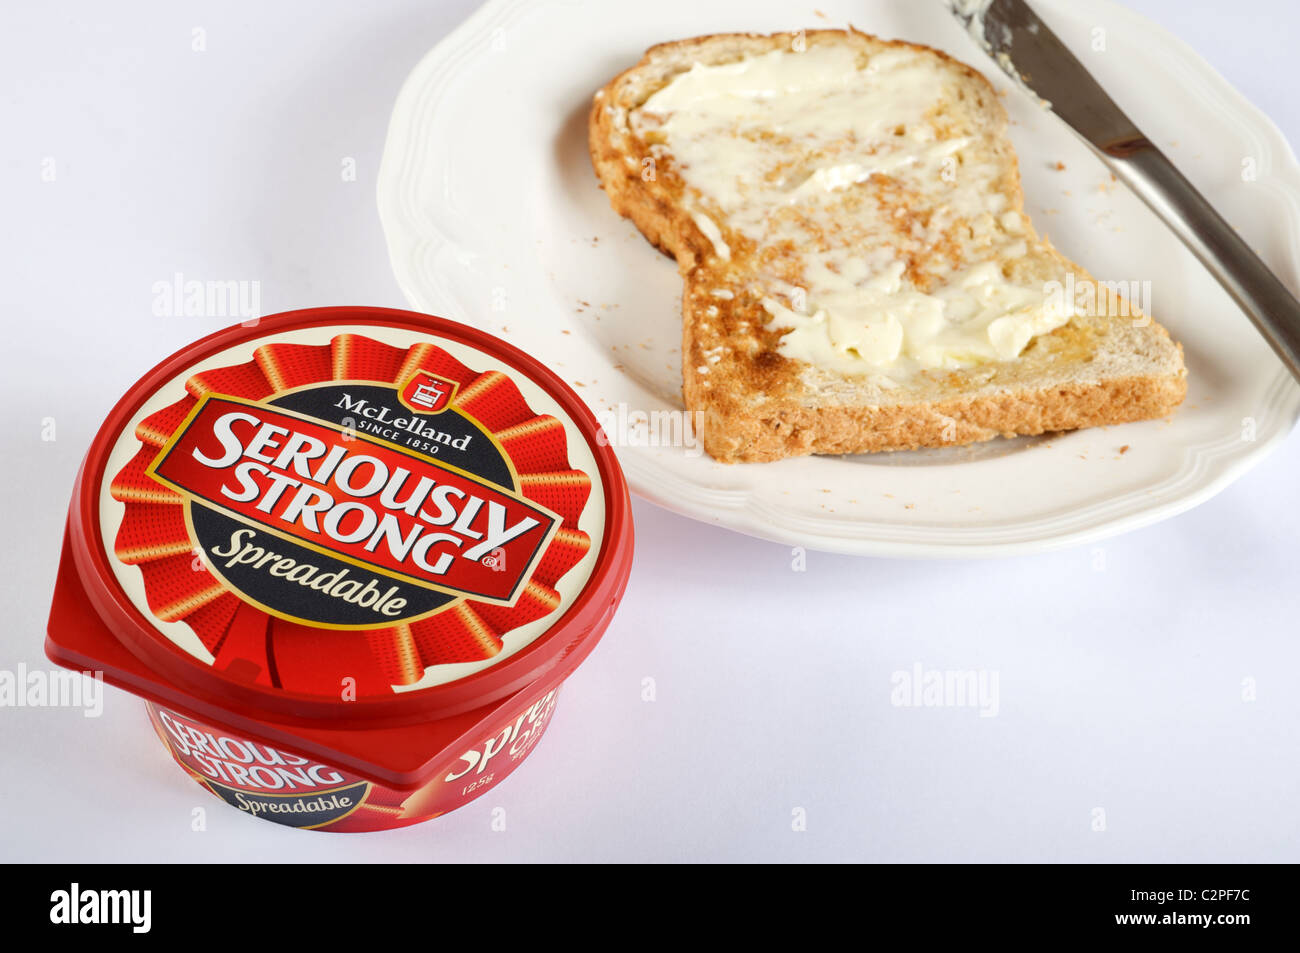 McLelland seriously strong spreadable cheese Stock Photo